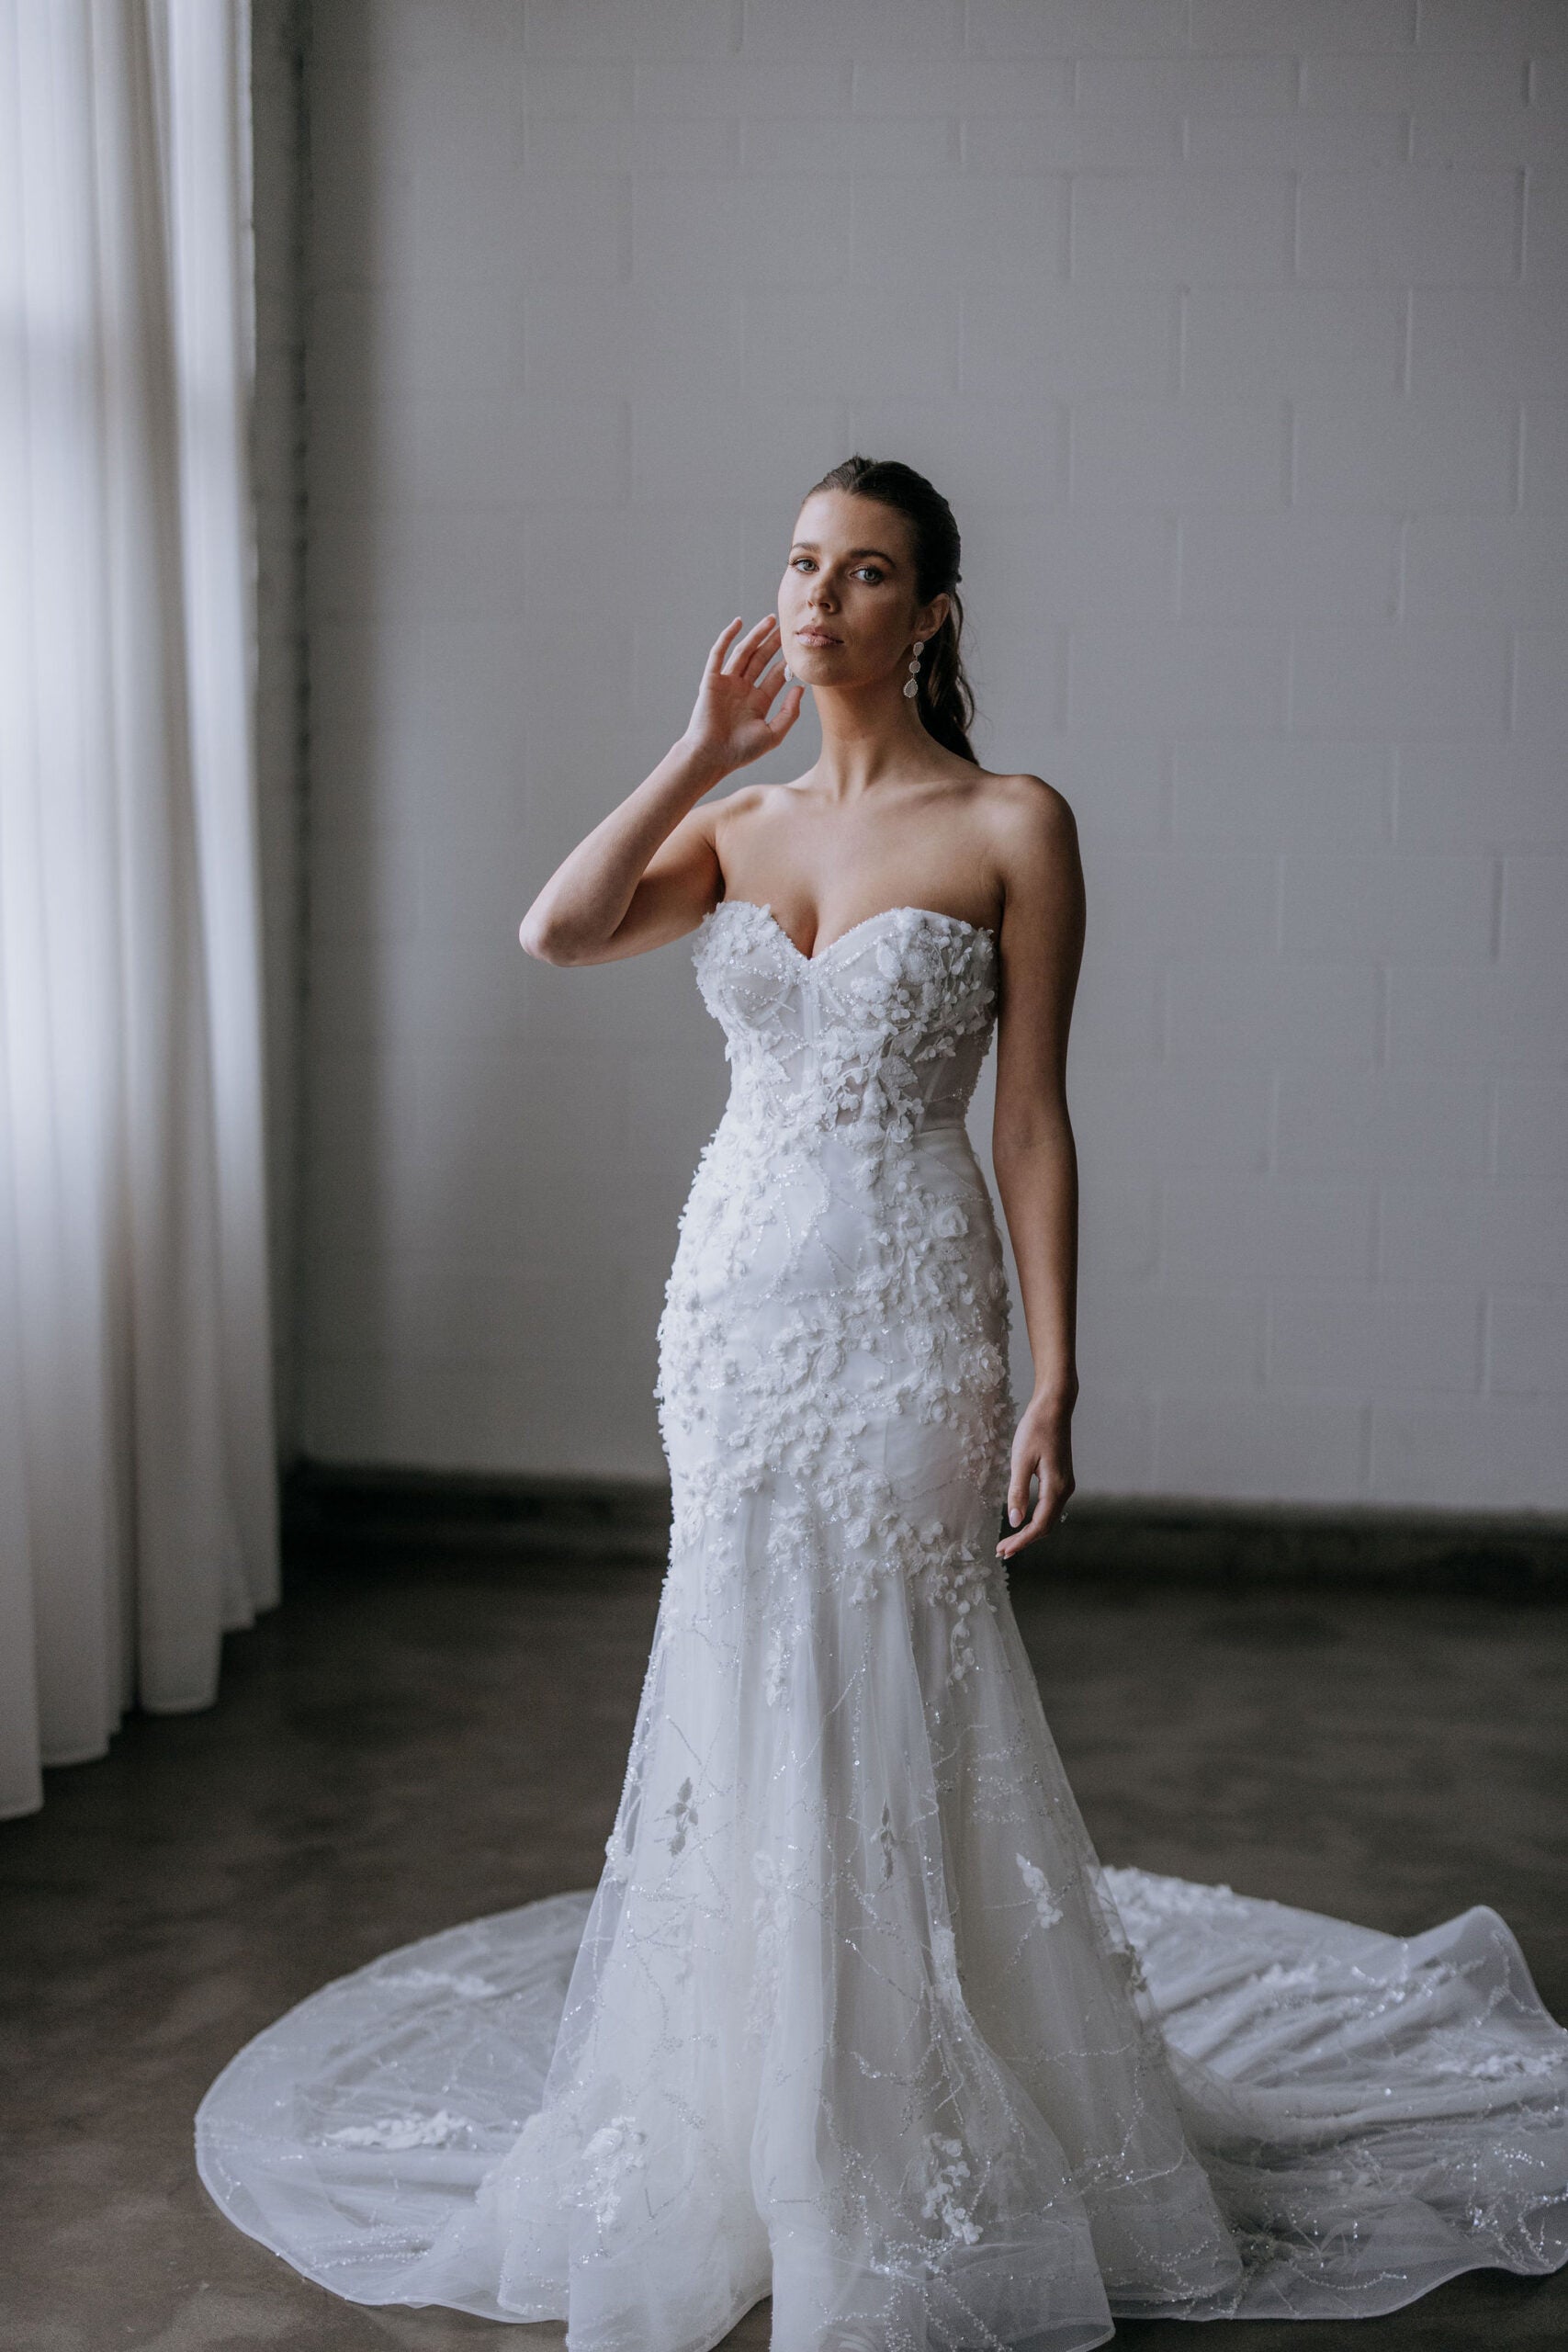 Tying up the Details :: Corset Style Dresses – bubbly bride